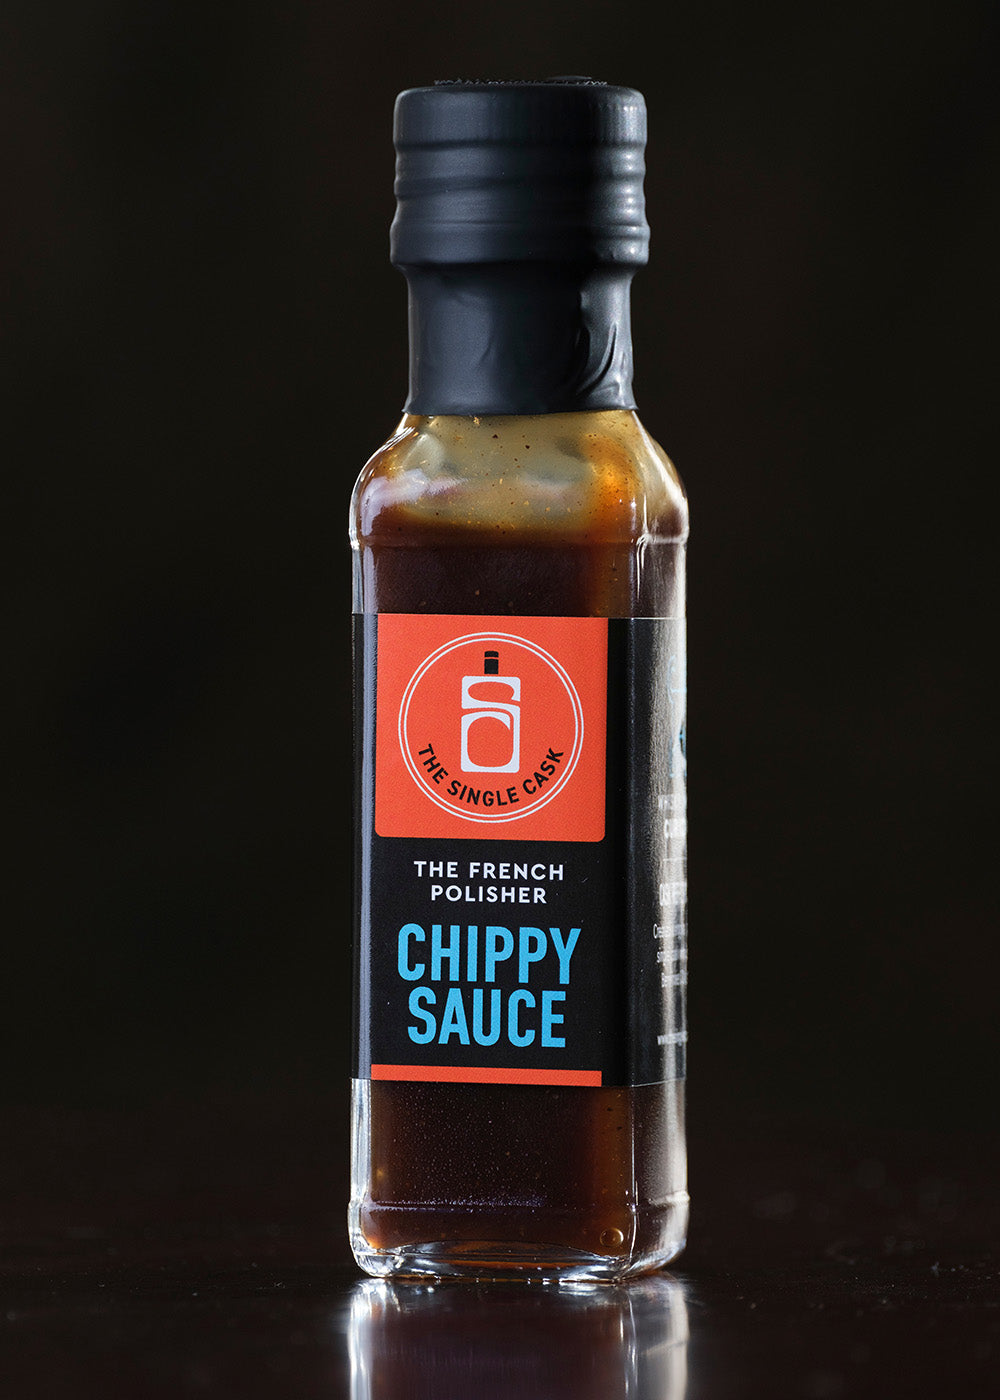 The French Polisher Chippy Sauce